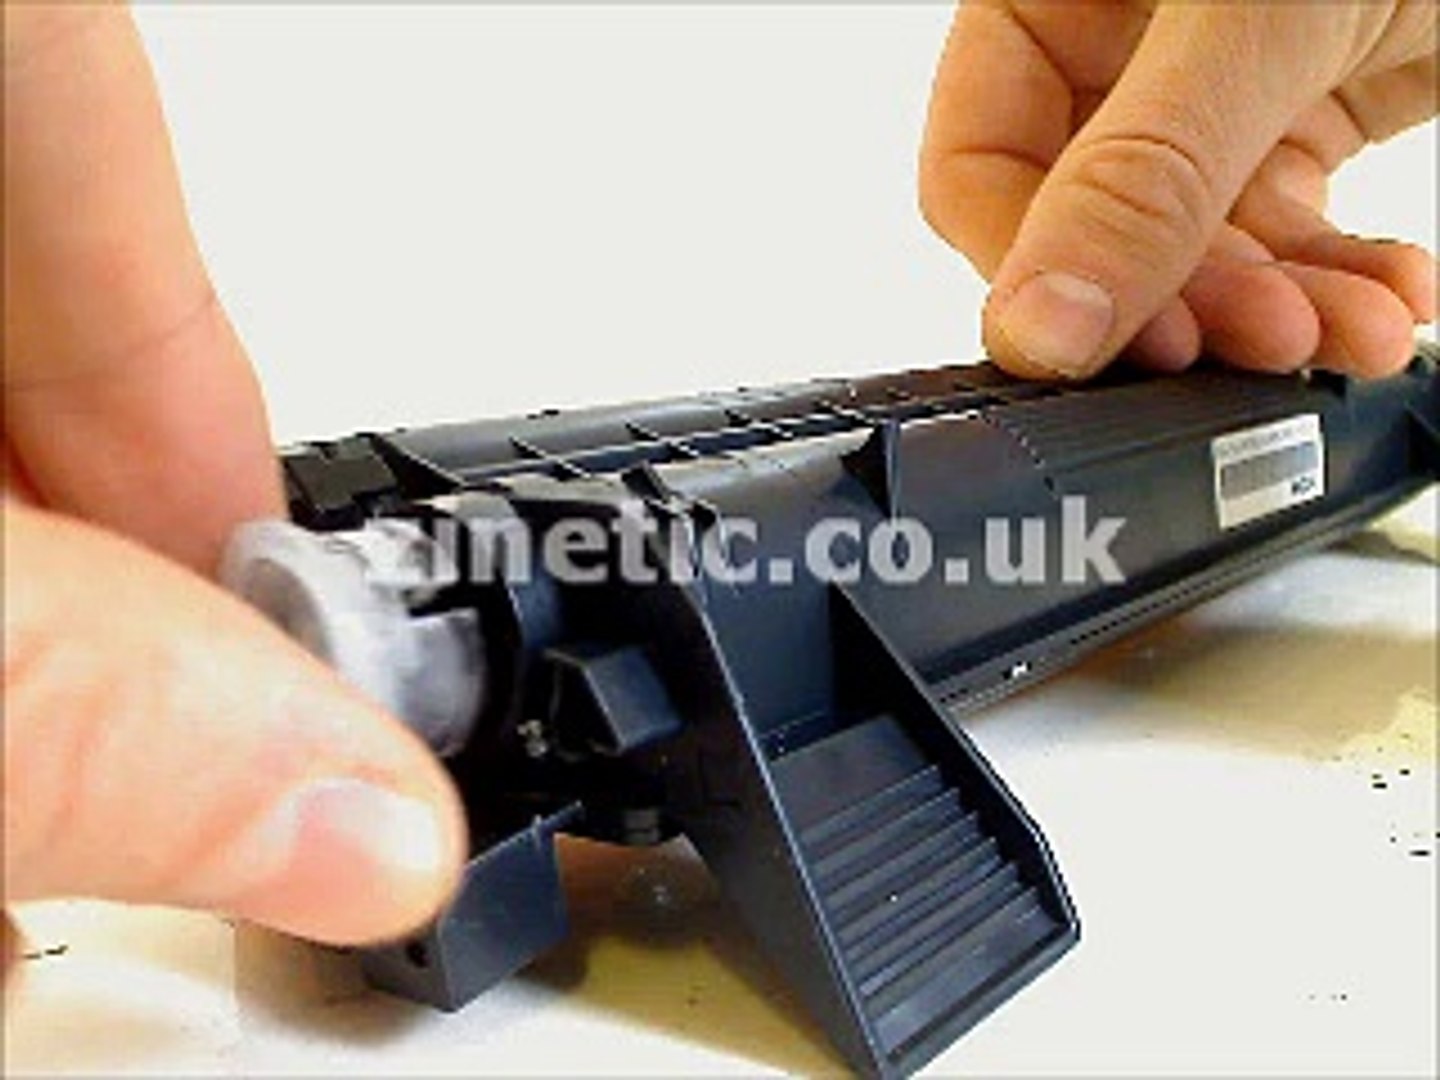 how to refill the Brother hl-1212w toner cartridge - video Dailymotion